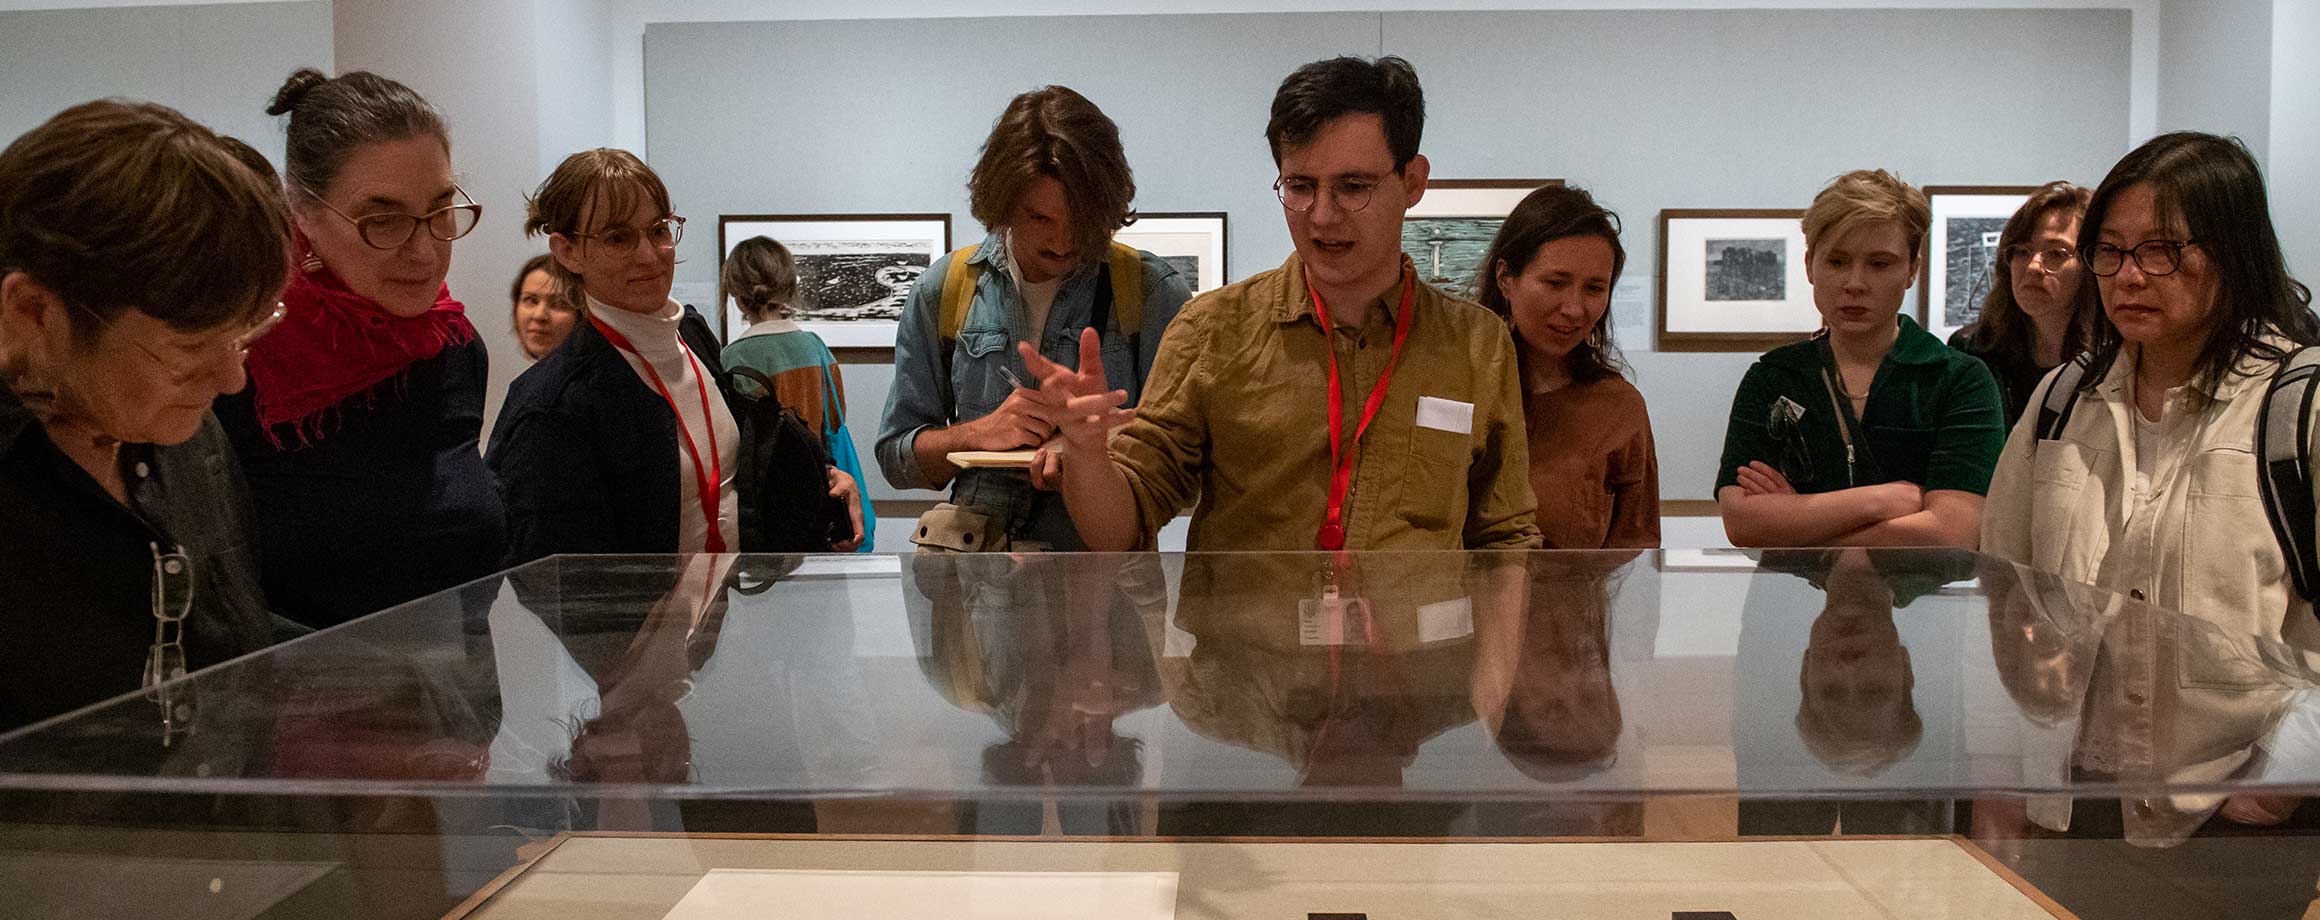 Fellows observe antiquated documents in a protective a glass cabinet in a museum gallery.